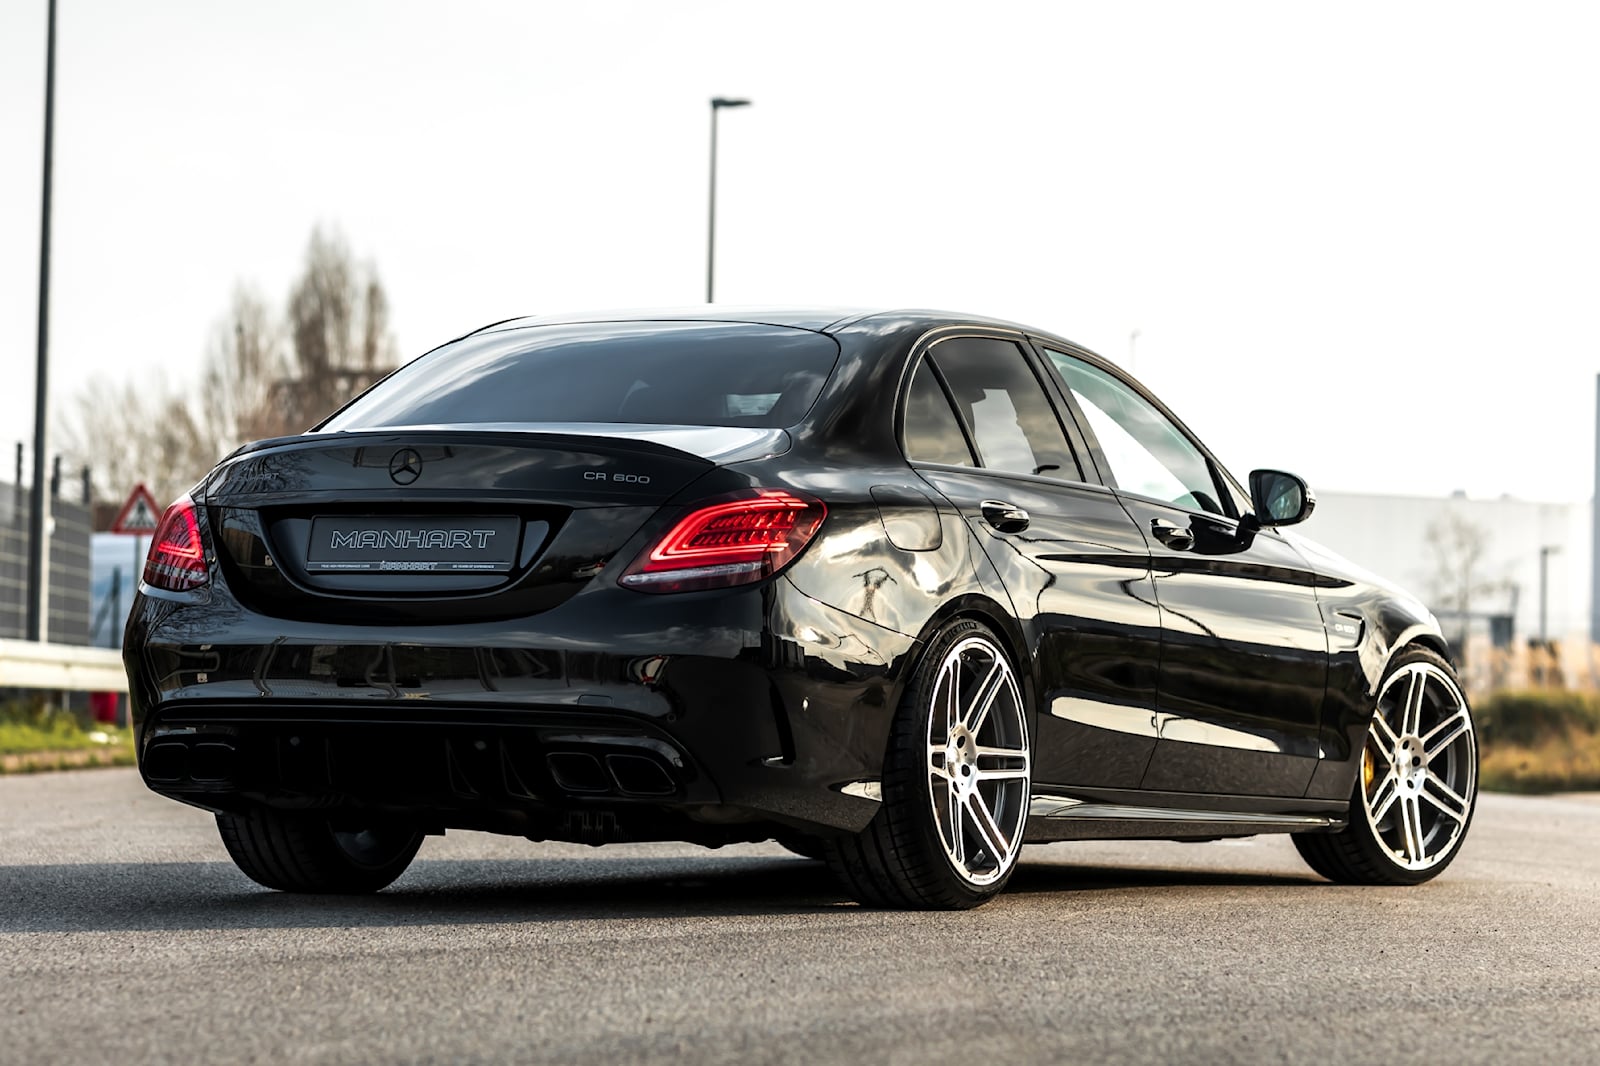 Mercedes-AMG C63 Becomes Q Car With Over 600 Horsepower